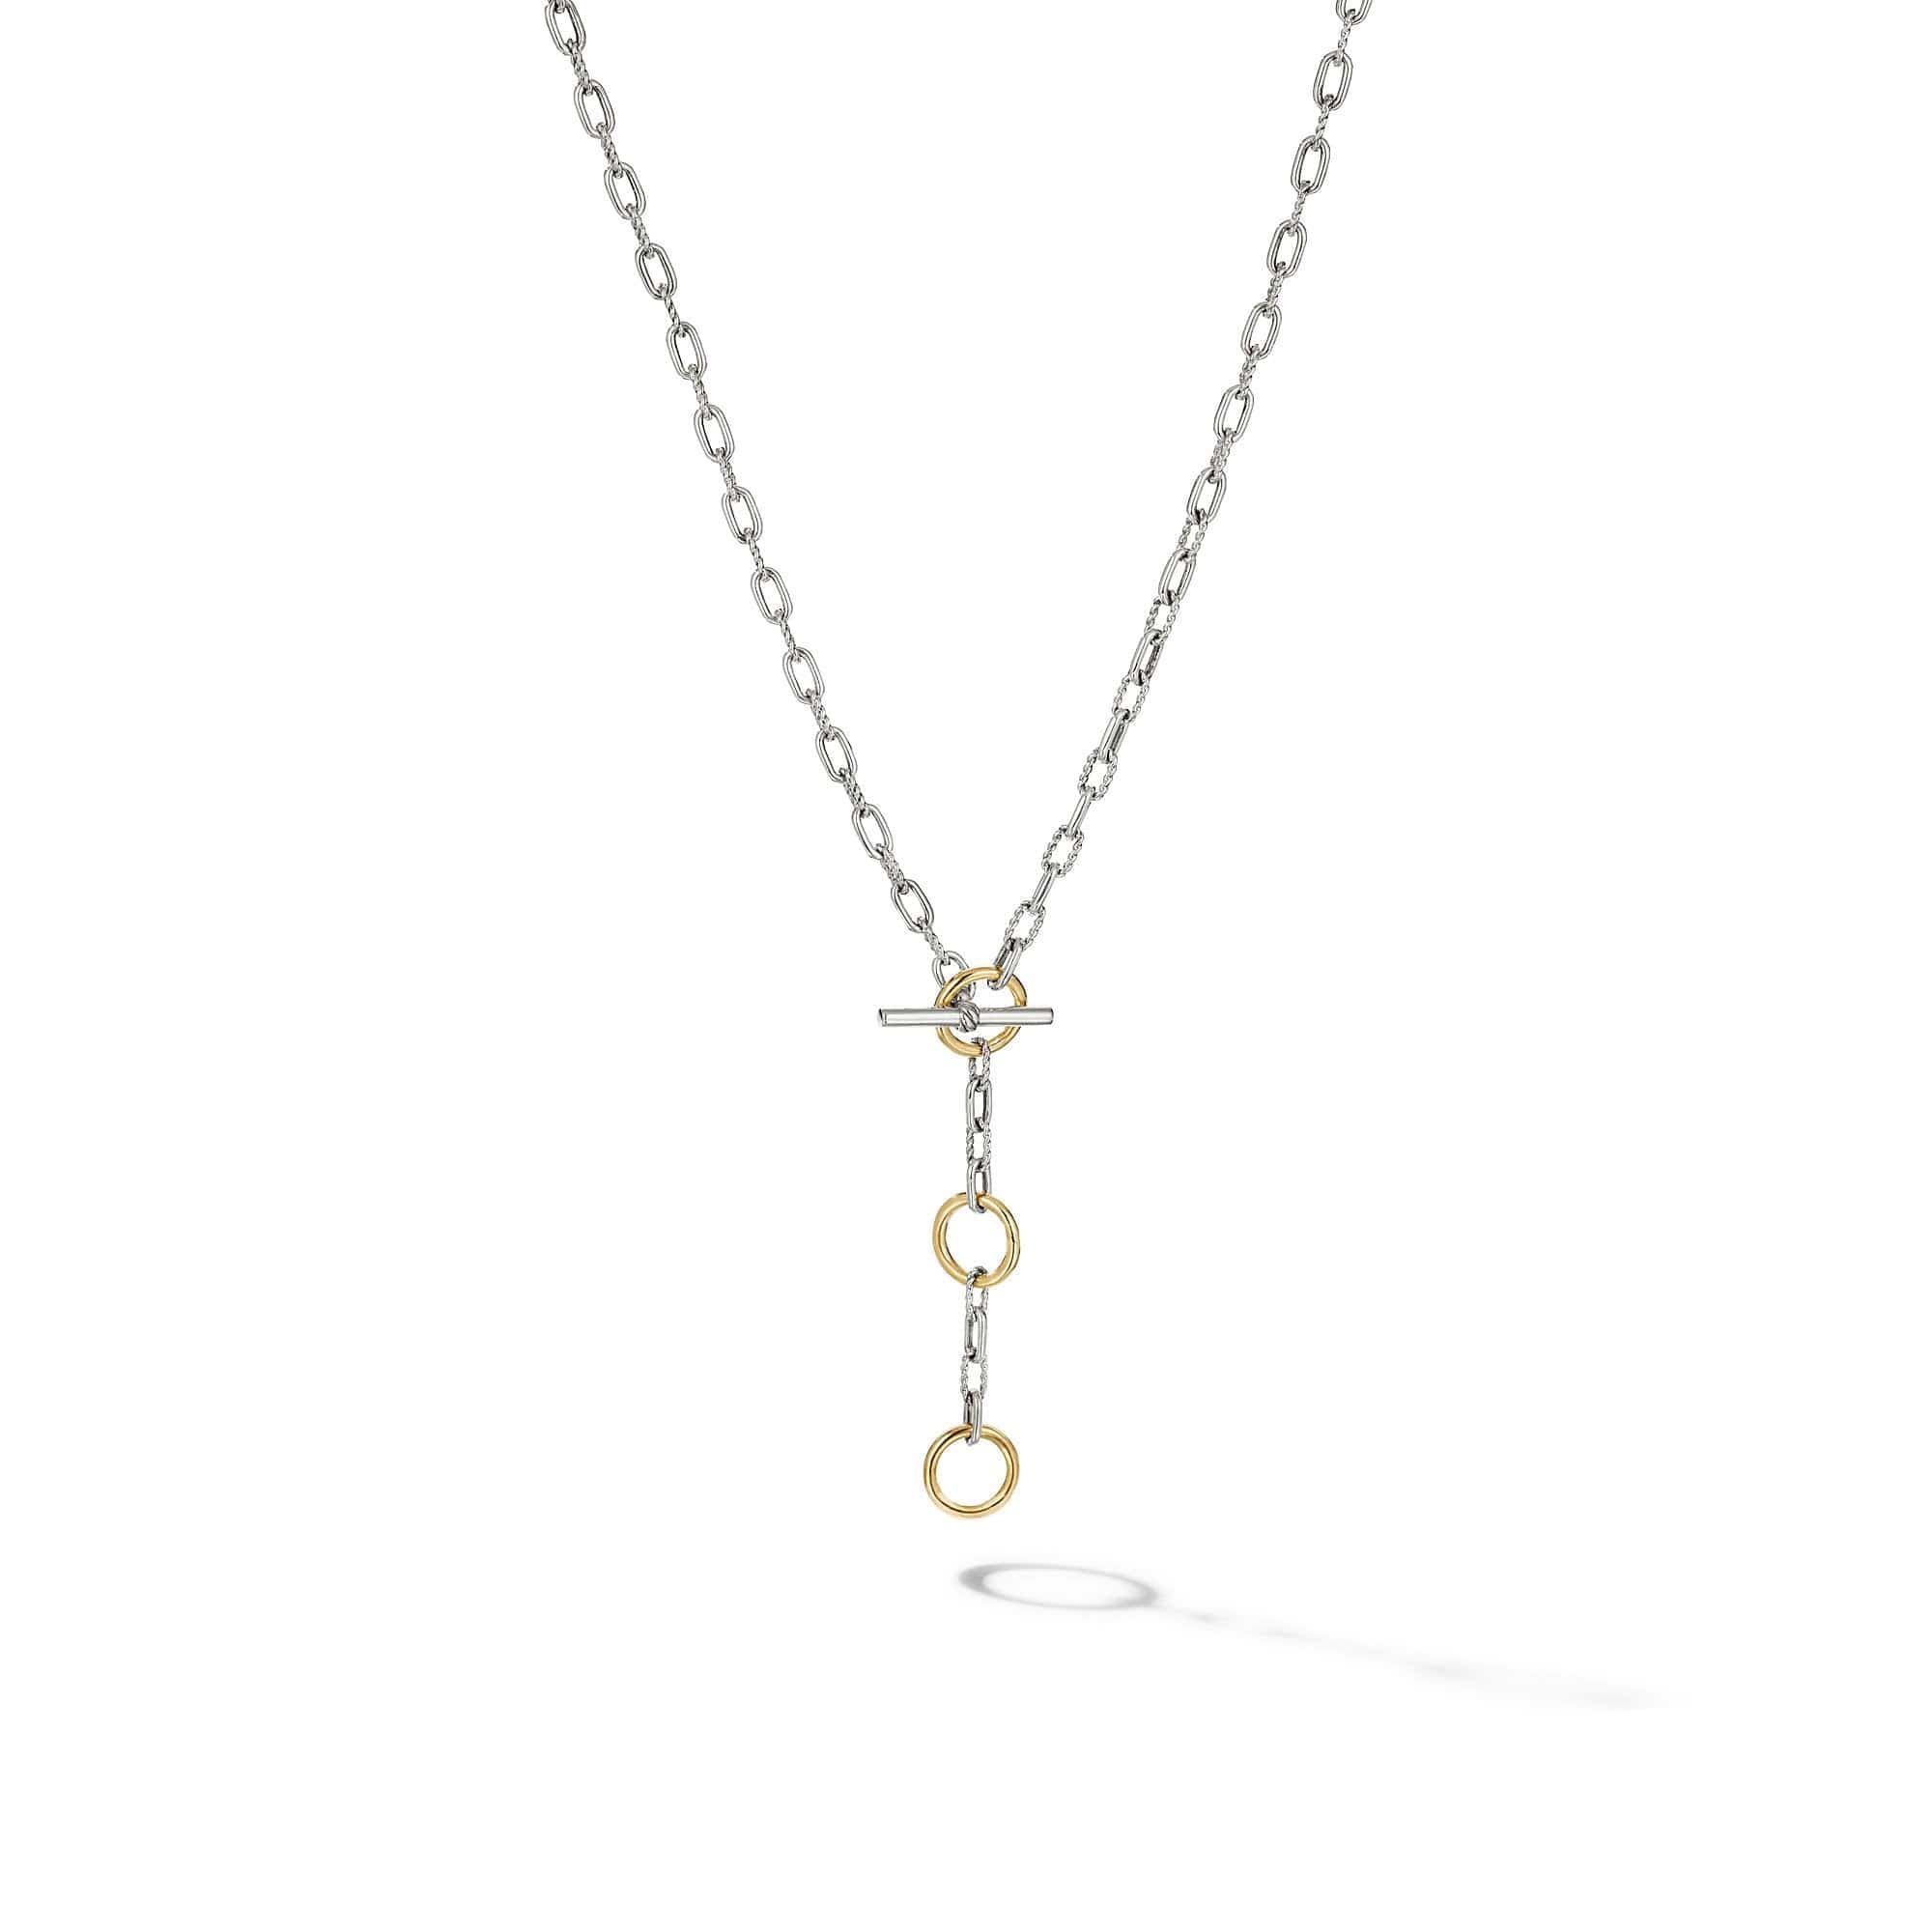 DY Madison® Three Ring Chain Necklace with 18K Yellow Gold